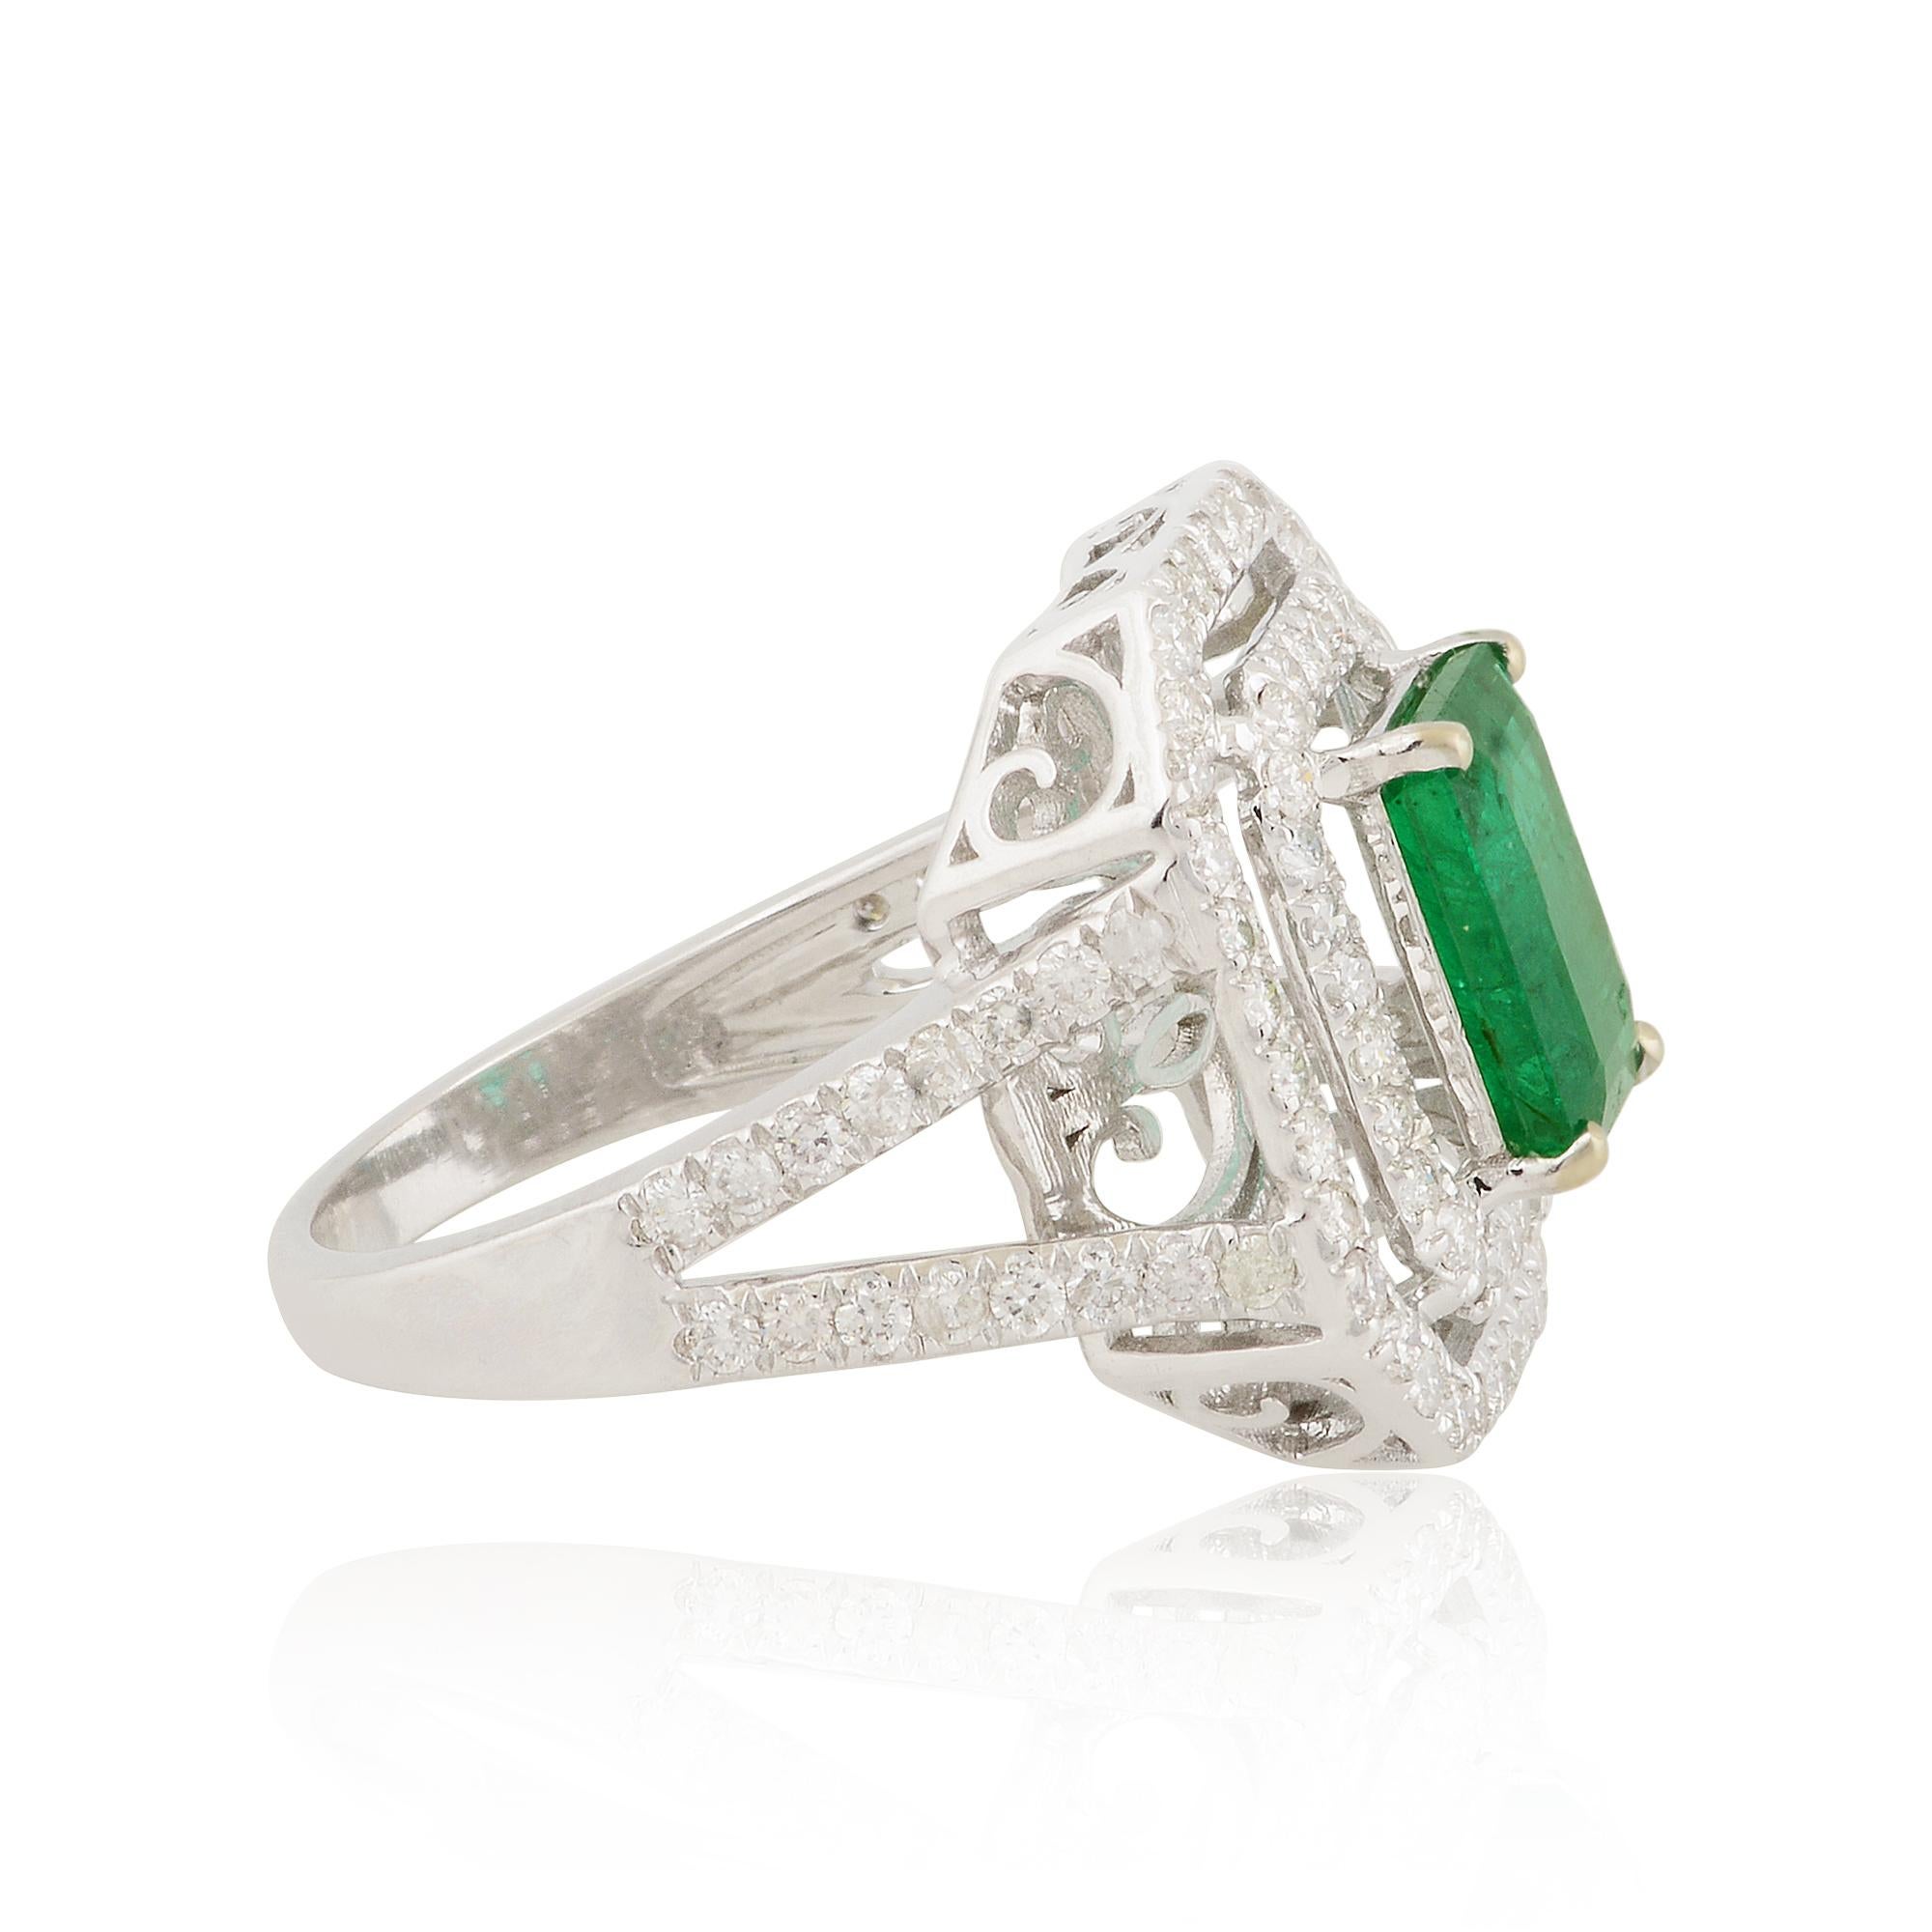 Surrounding the emerald are dazzling diamonds, meticulously set to enhance its natural beauty and brilliance. Each diamond is hand-selected for its exceptional quality and expertly placed in the lustrous 10 karat white gold setting, ensuring